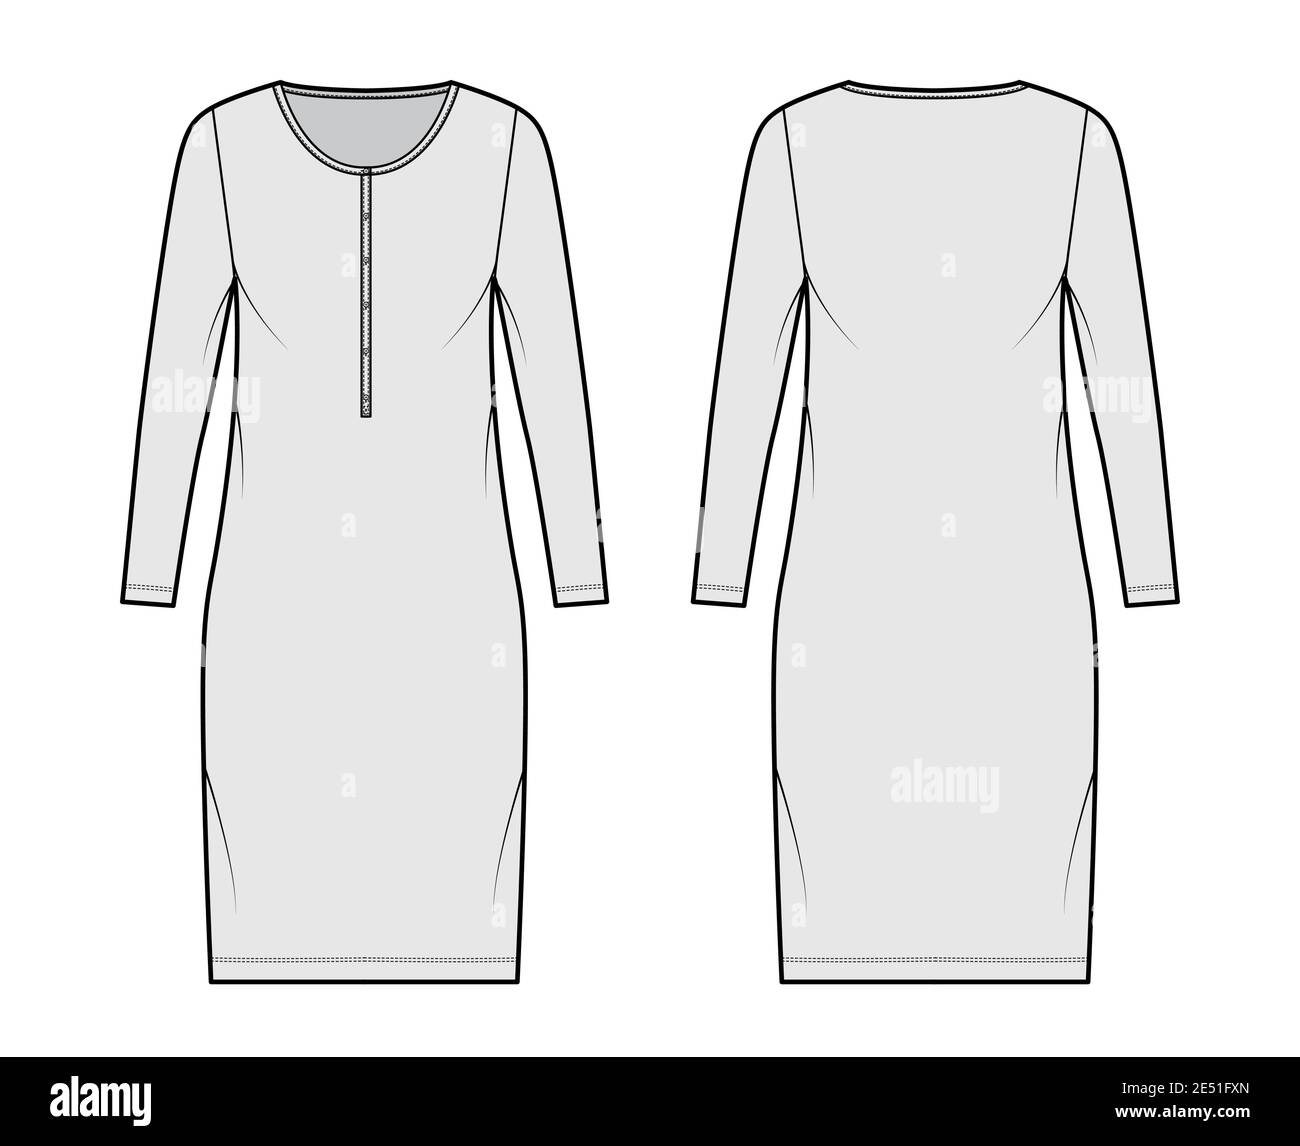 Shirt dress technical fashion illustration with henley neck, long sleeves, knee length, oversized, Pencil fullness. Flat apparel template front, back, grey color. Women, men, unisex CAD mockup Stock Vector